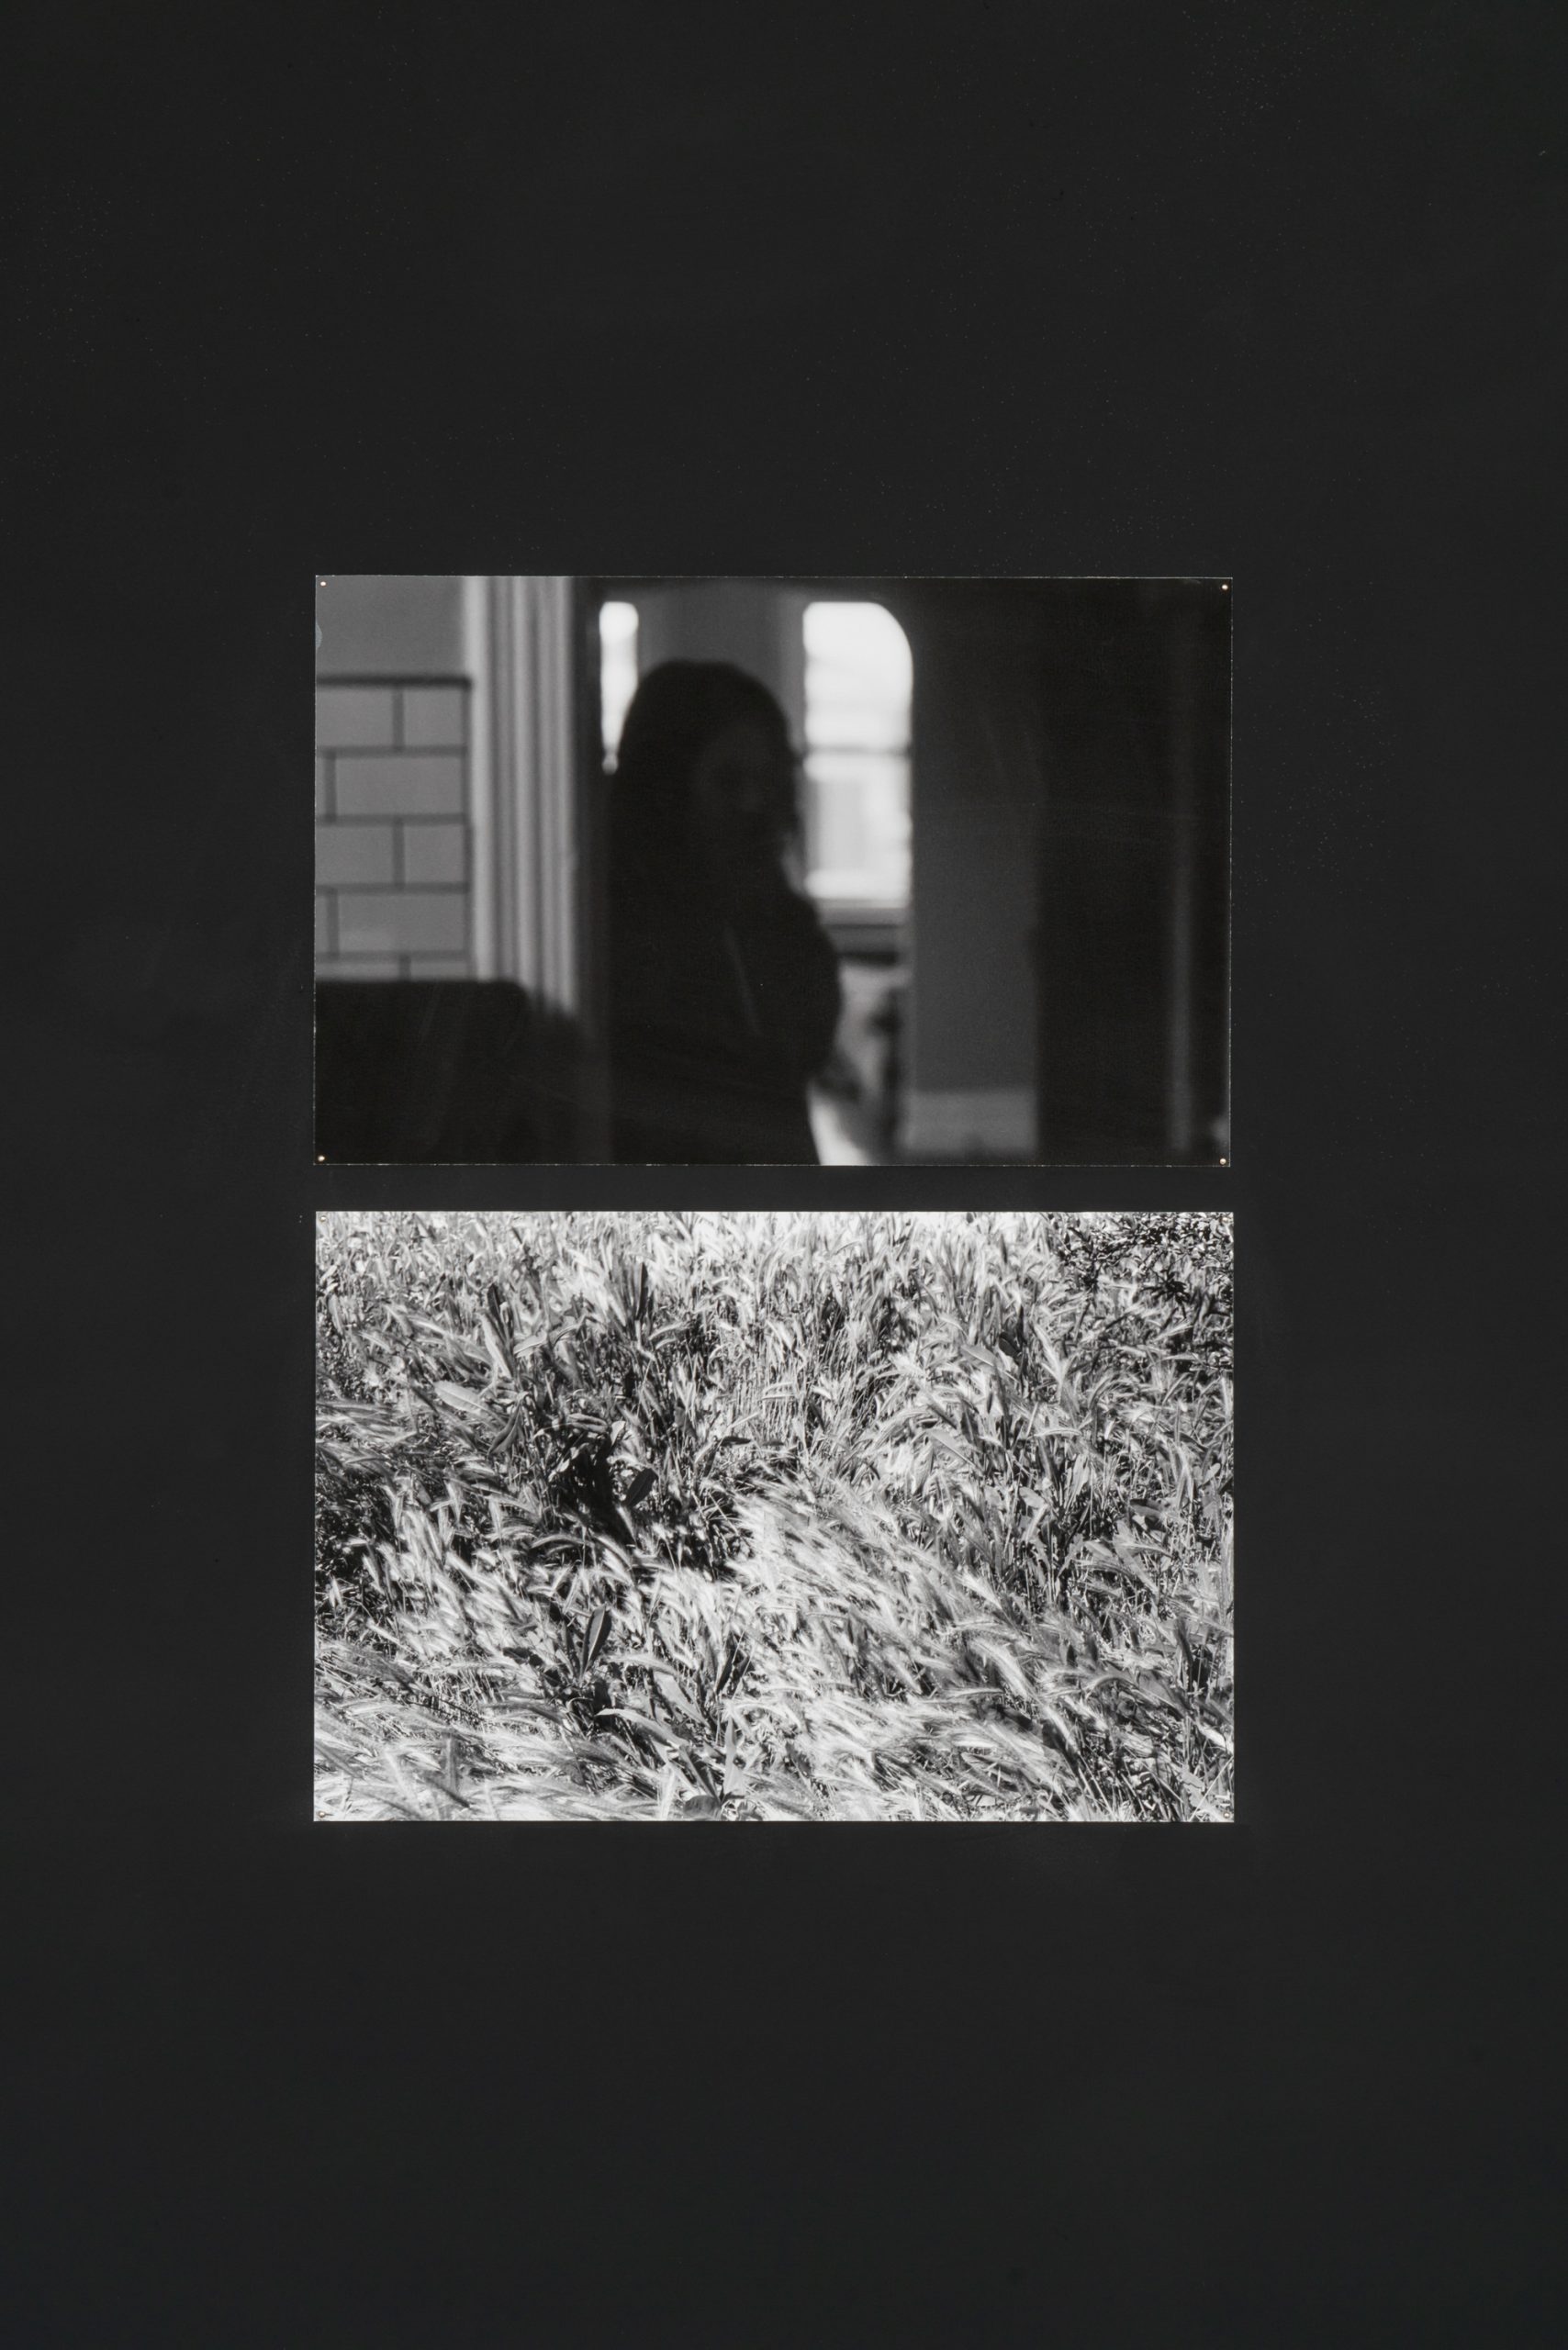 Image: A detail shot of two black and white photographs by Abigail Taubman. The top image is of a person completely in shadow in a doorway, and the bottom image shows a field. Photo by Robert Chase Heishman.